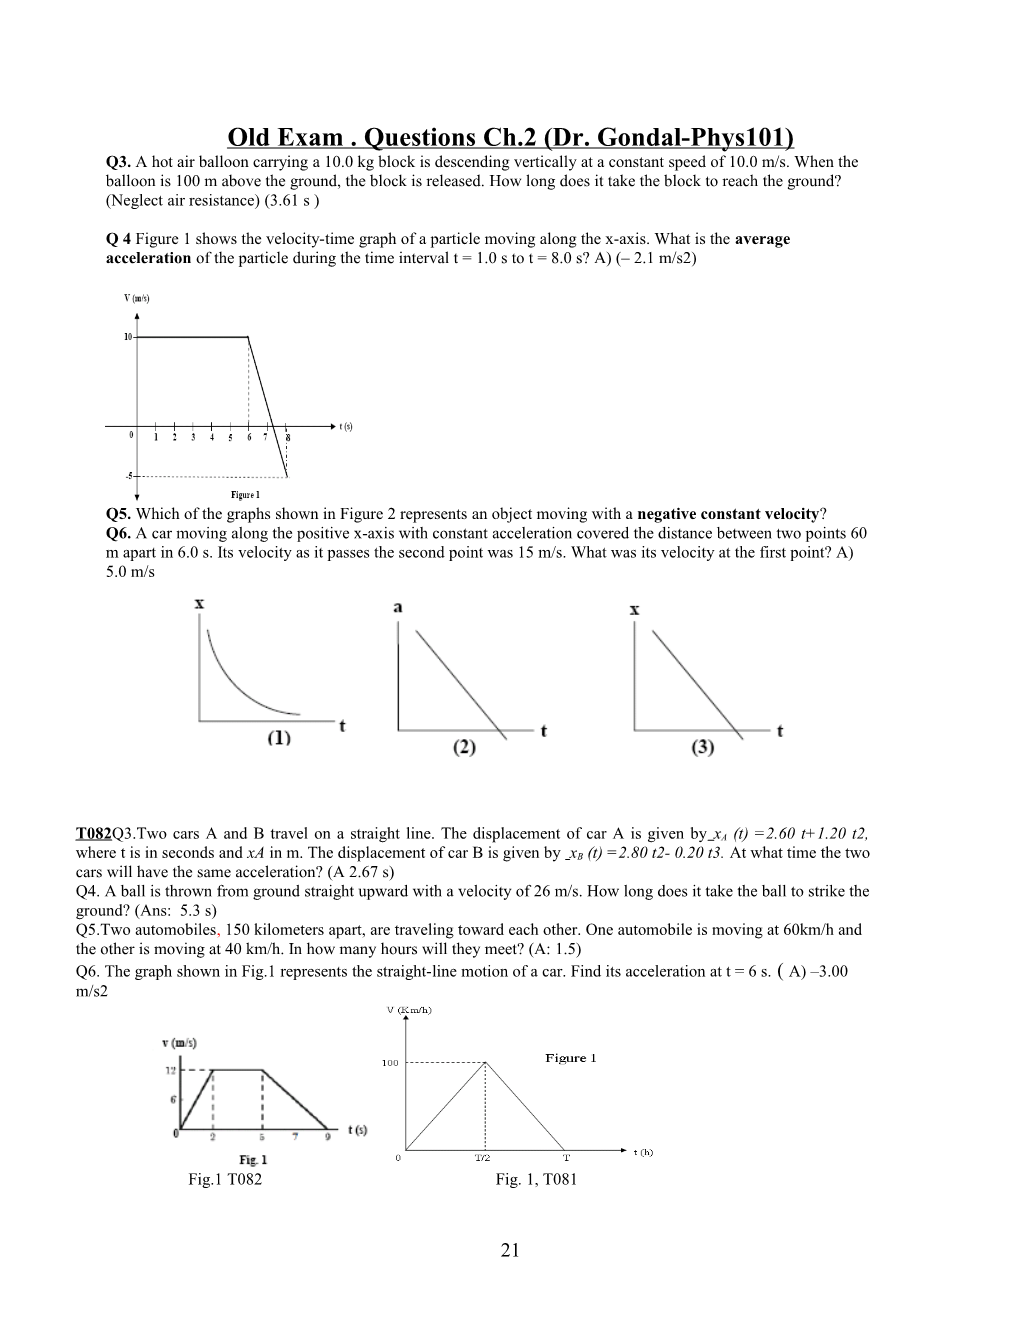 Old Exam. Questions Ch.2 (Dr. Gondal-Phys101)